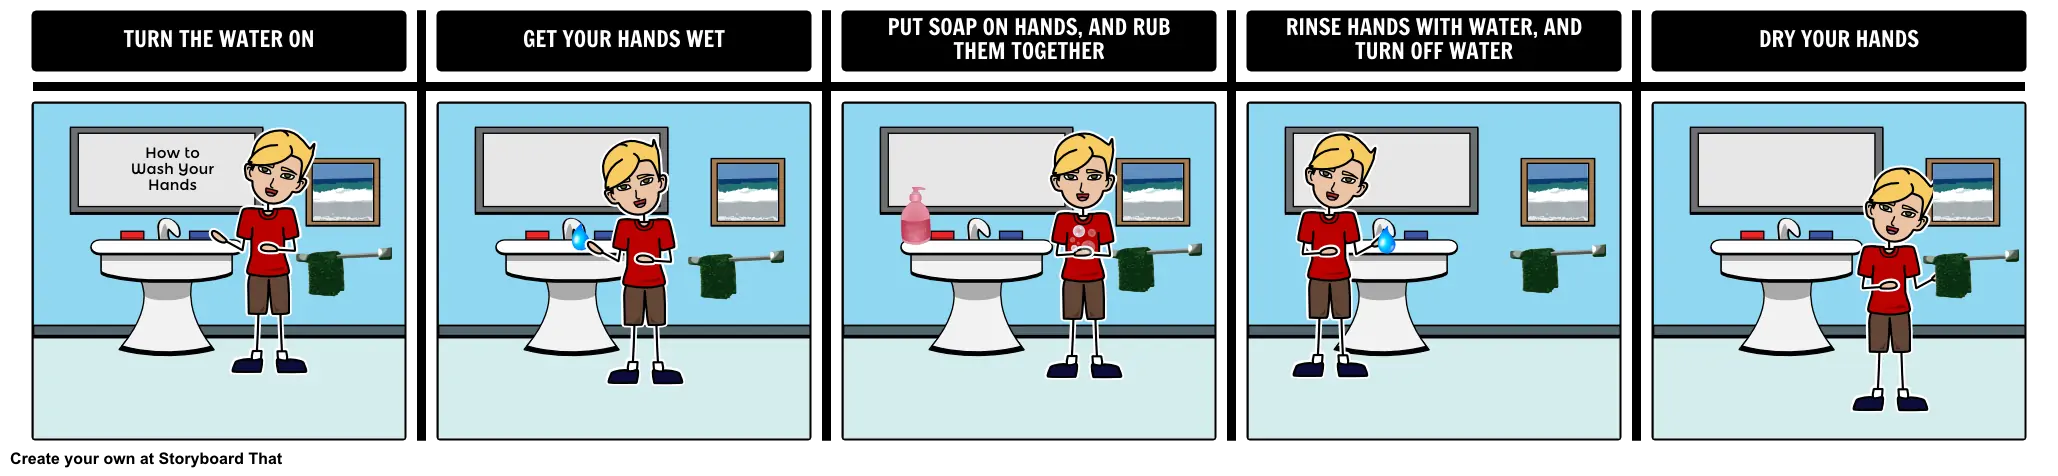 How To Boards - Washing Hands